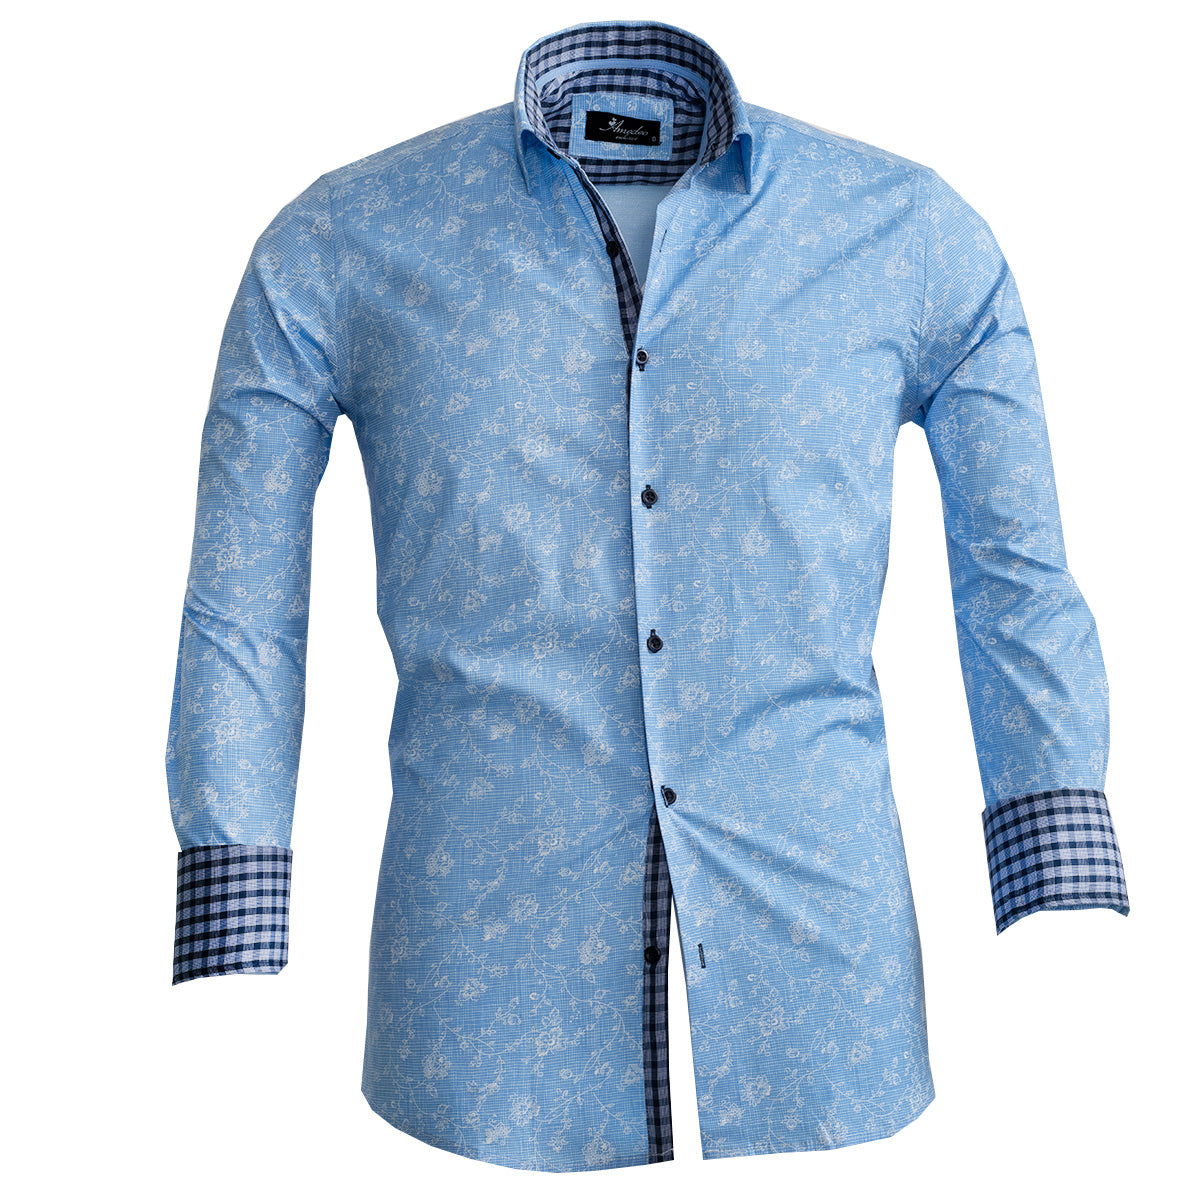 Blue Floral Mens Slim Fit French Cuff Shirts with Cufflink Holes - Casual and Formal